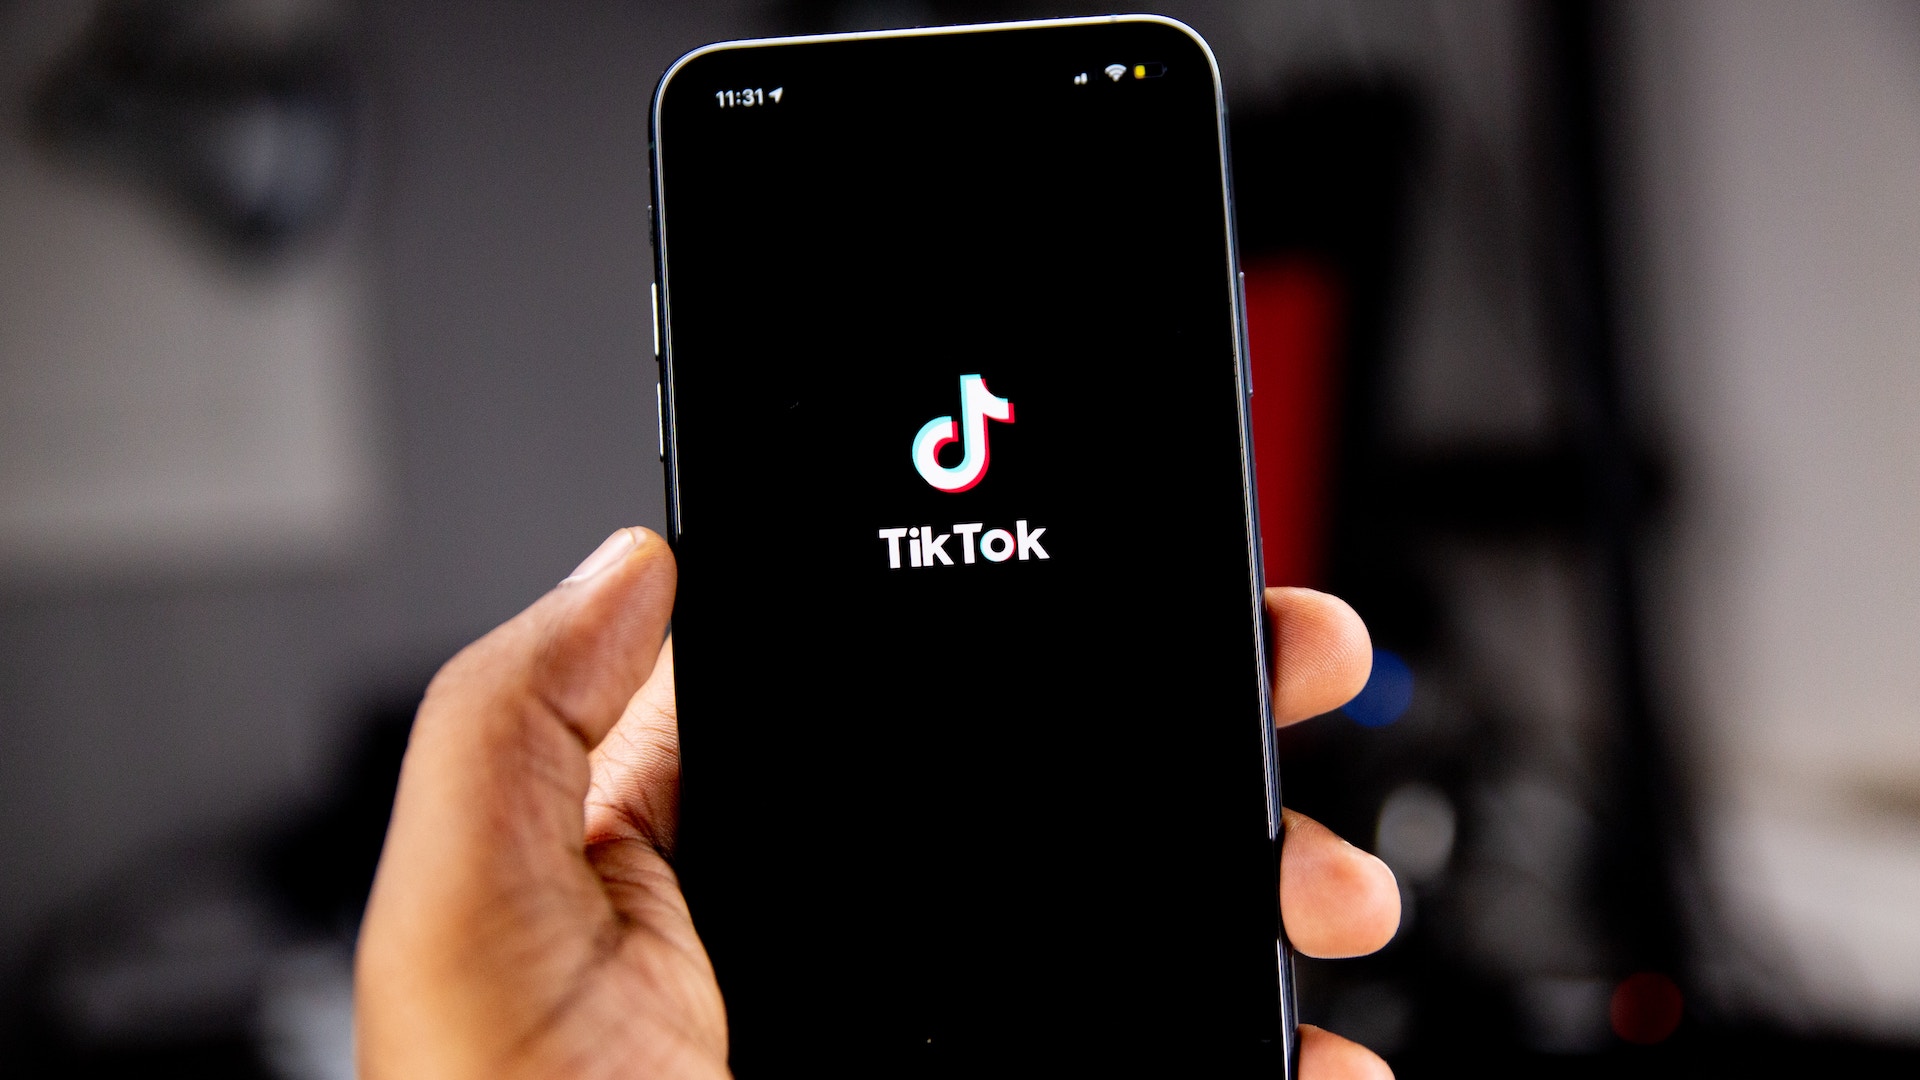 white hand holding an iphone with a black screen and a TikTok logo